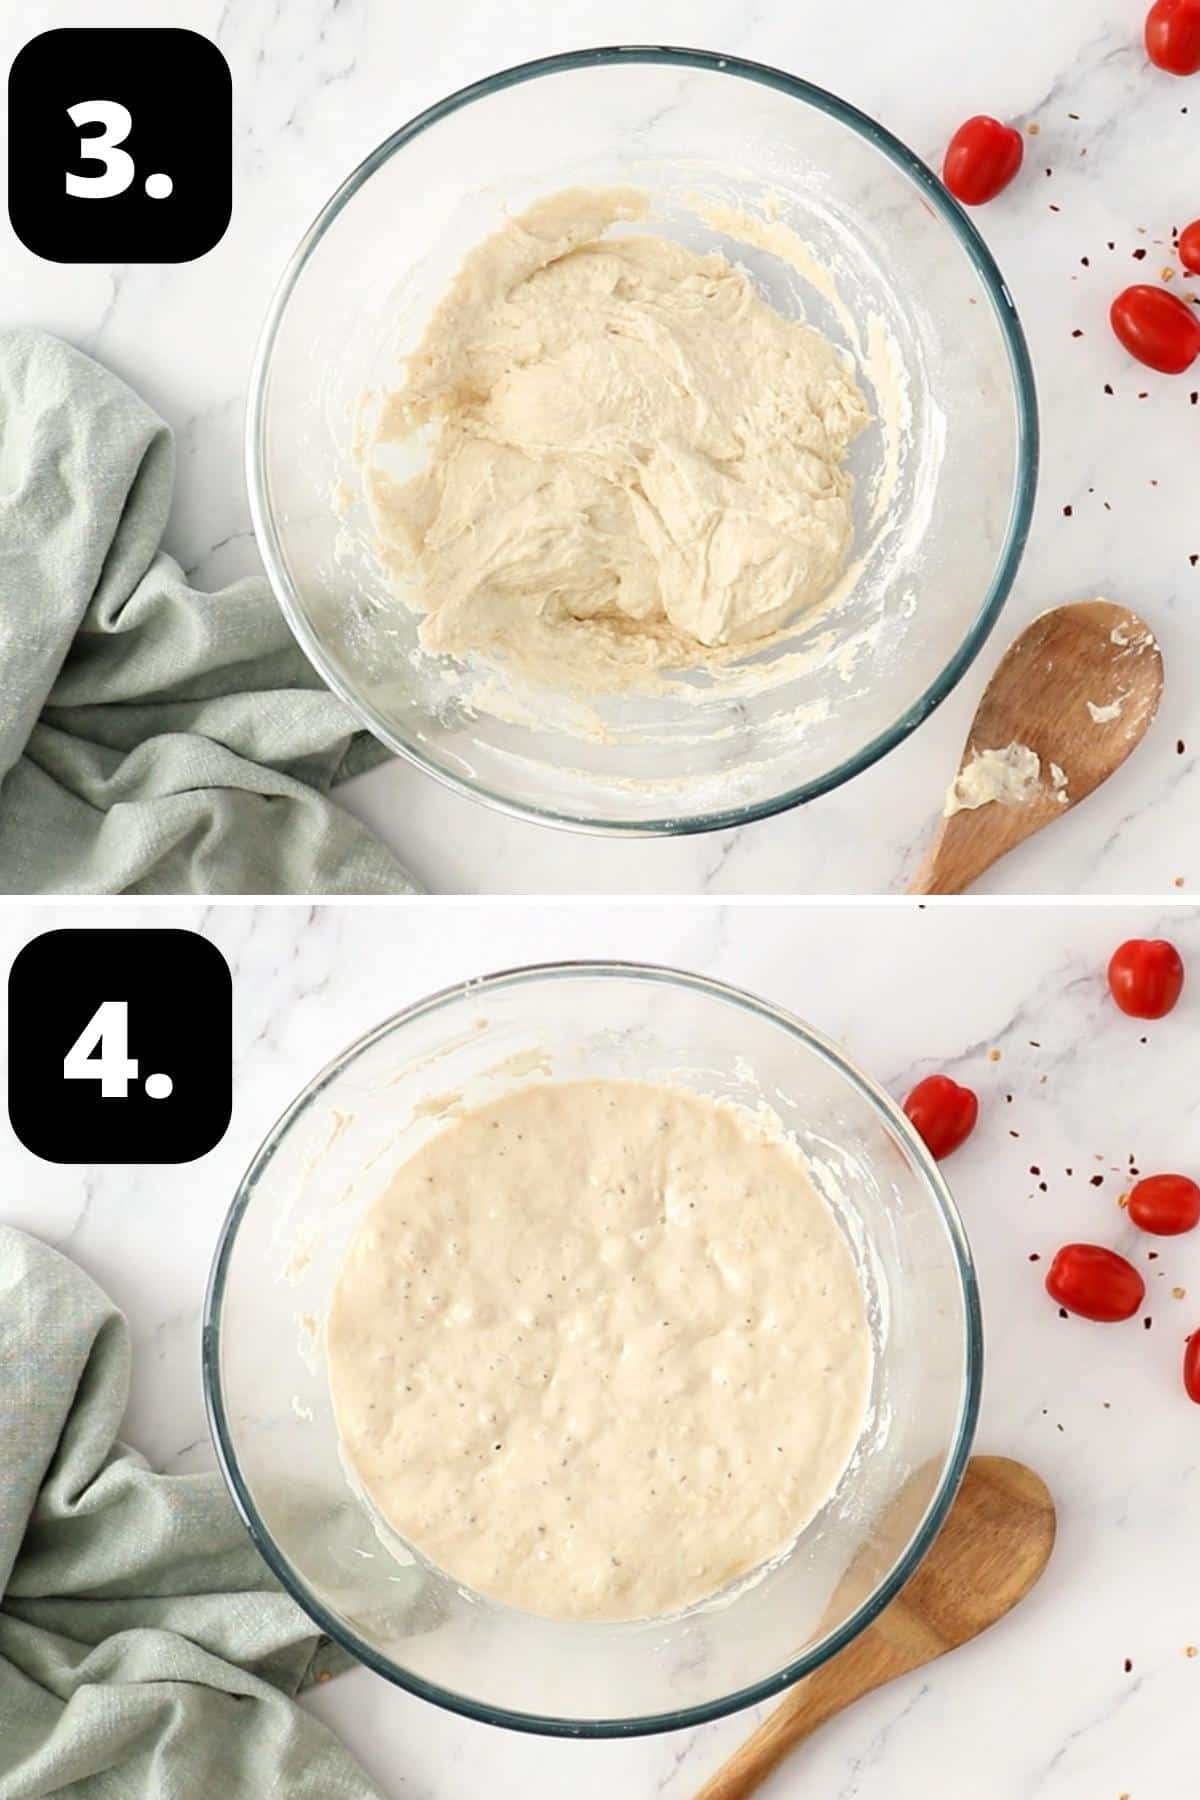 Steps 3-4 of preparing this recipe - the mixed dough ready for rising and the dough after having risen.